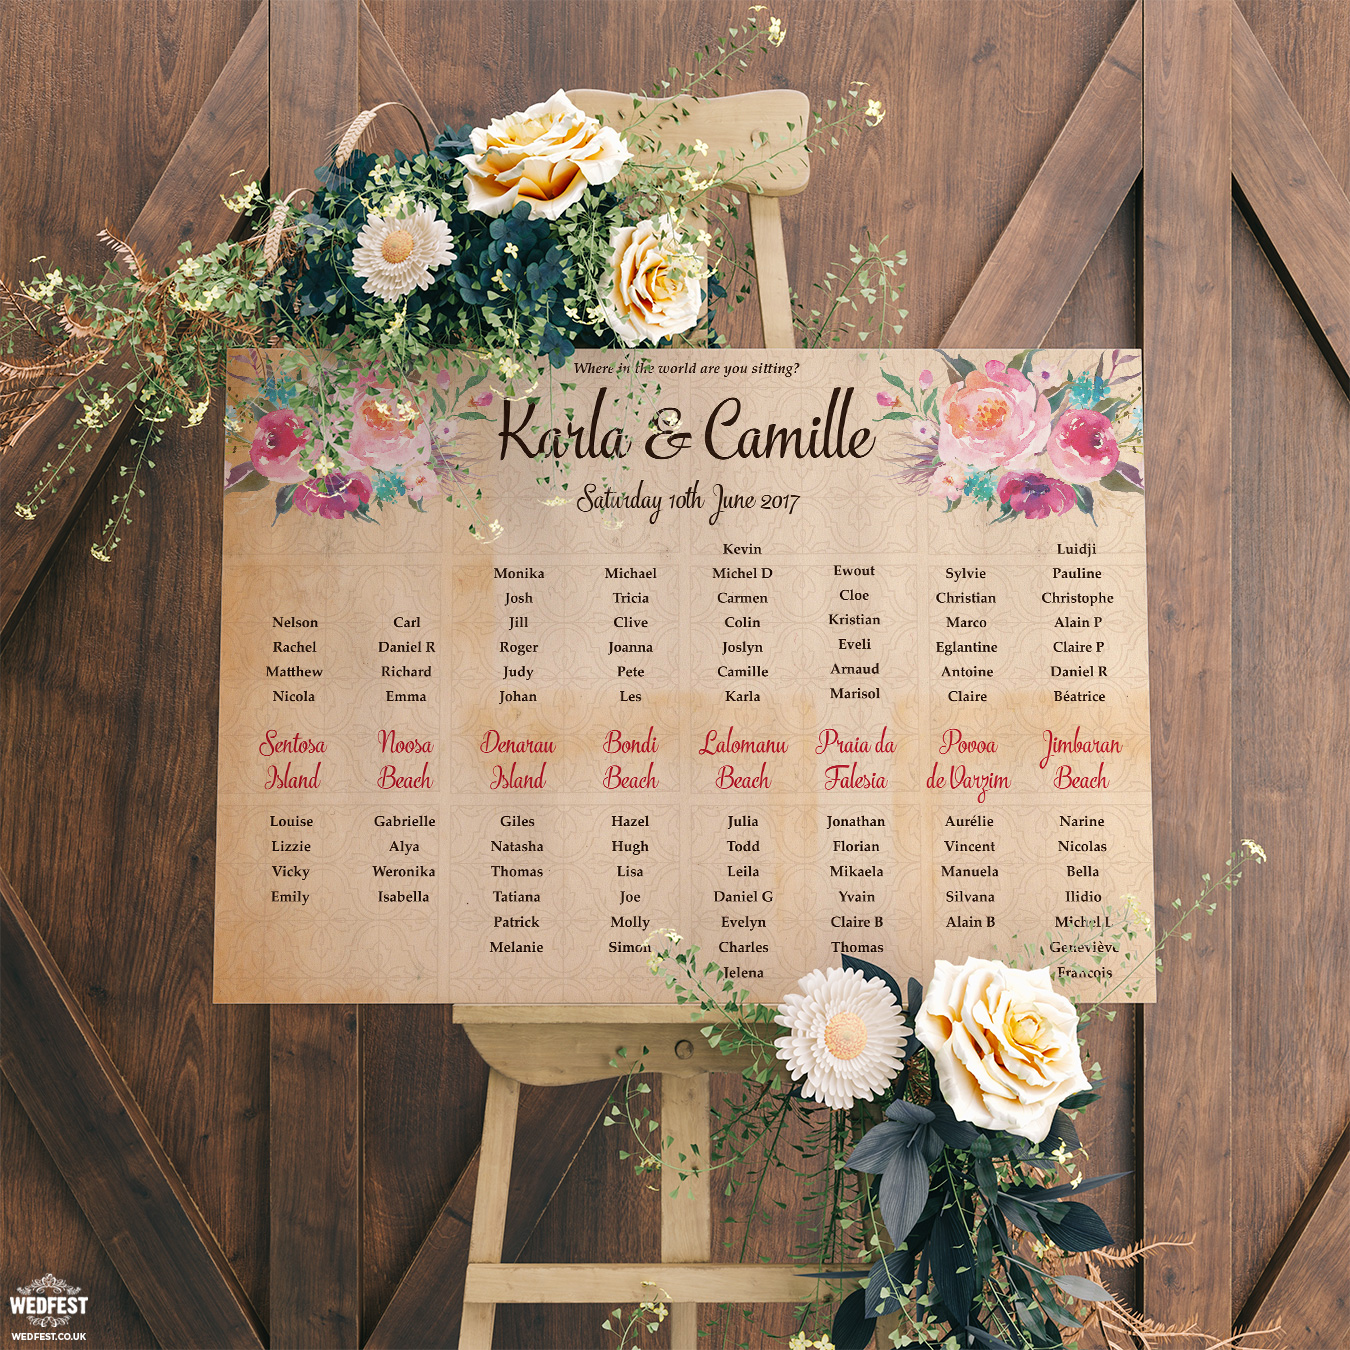 Themed Wedding Table Seating Plans Wedfest